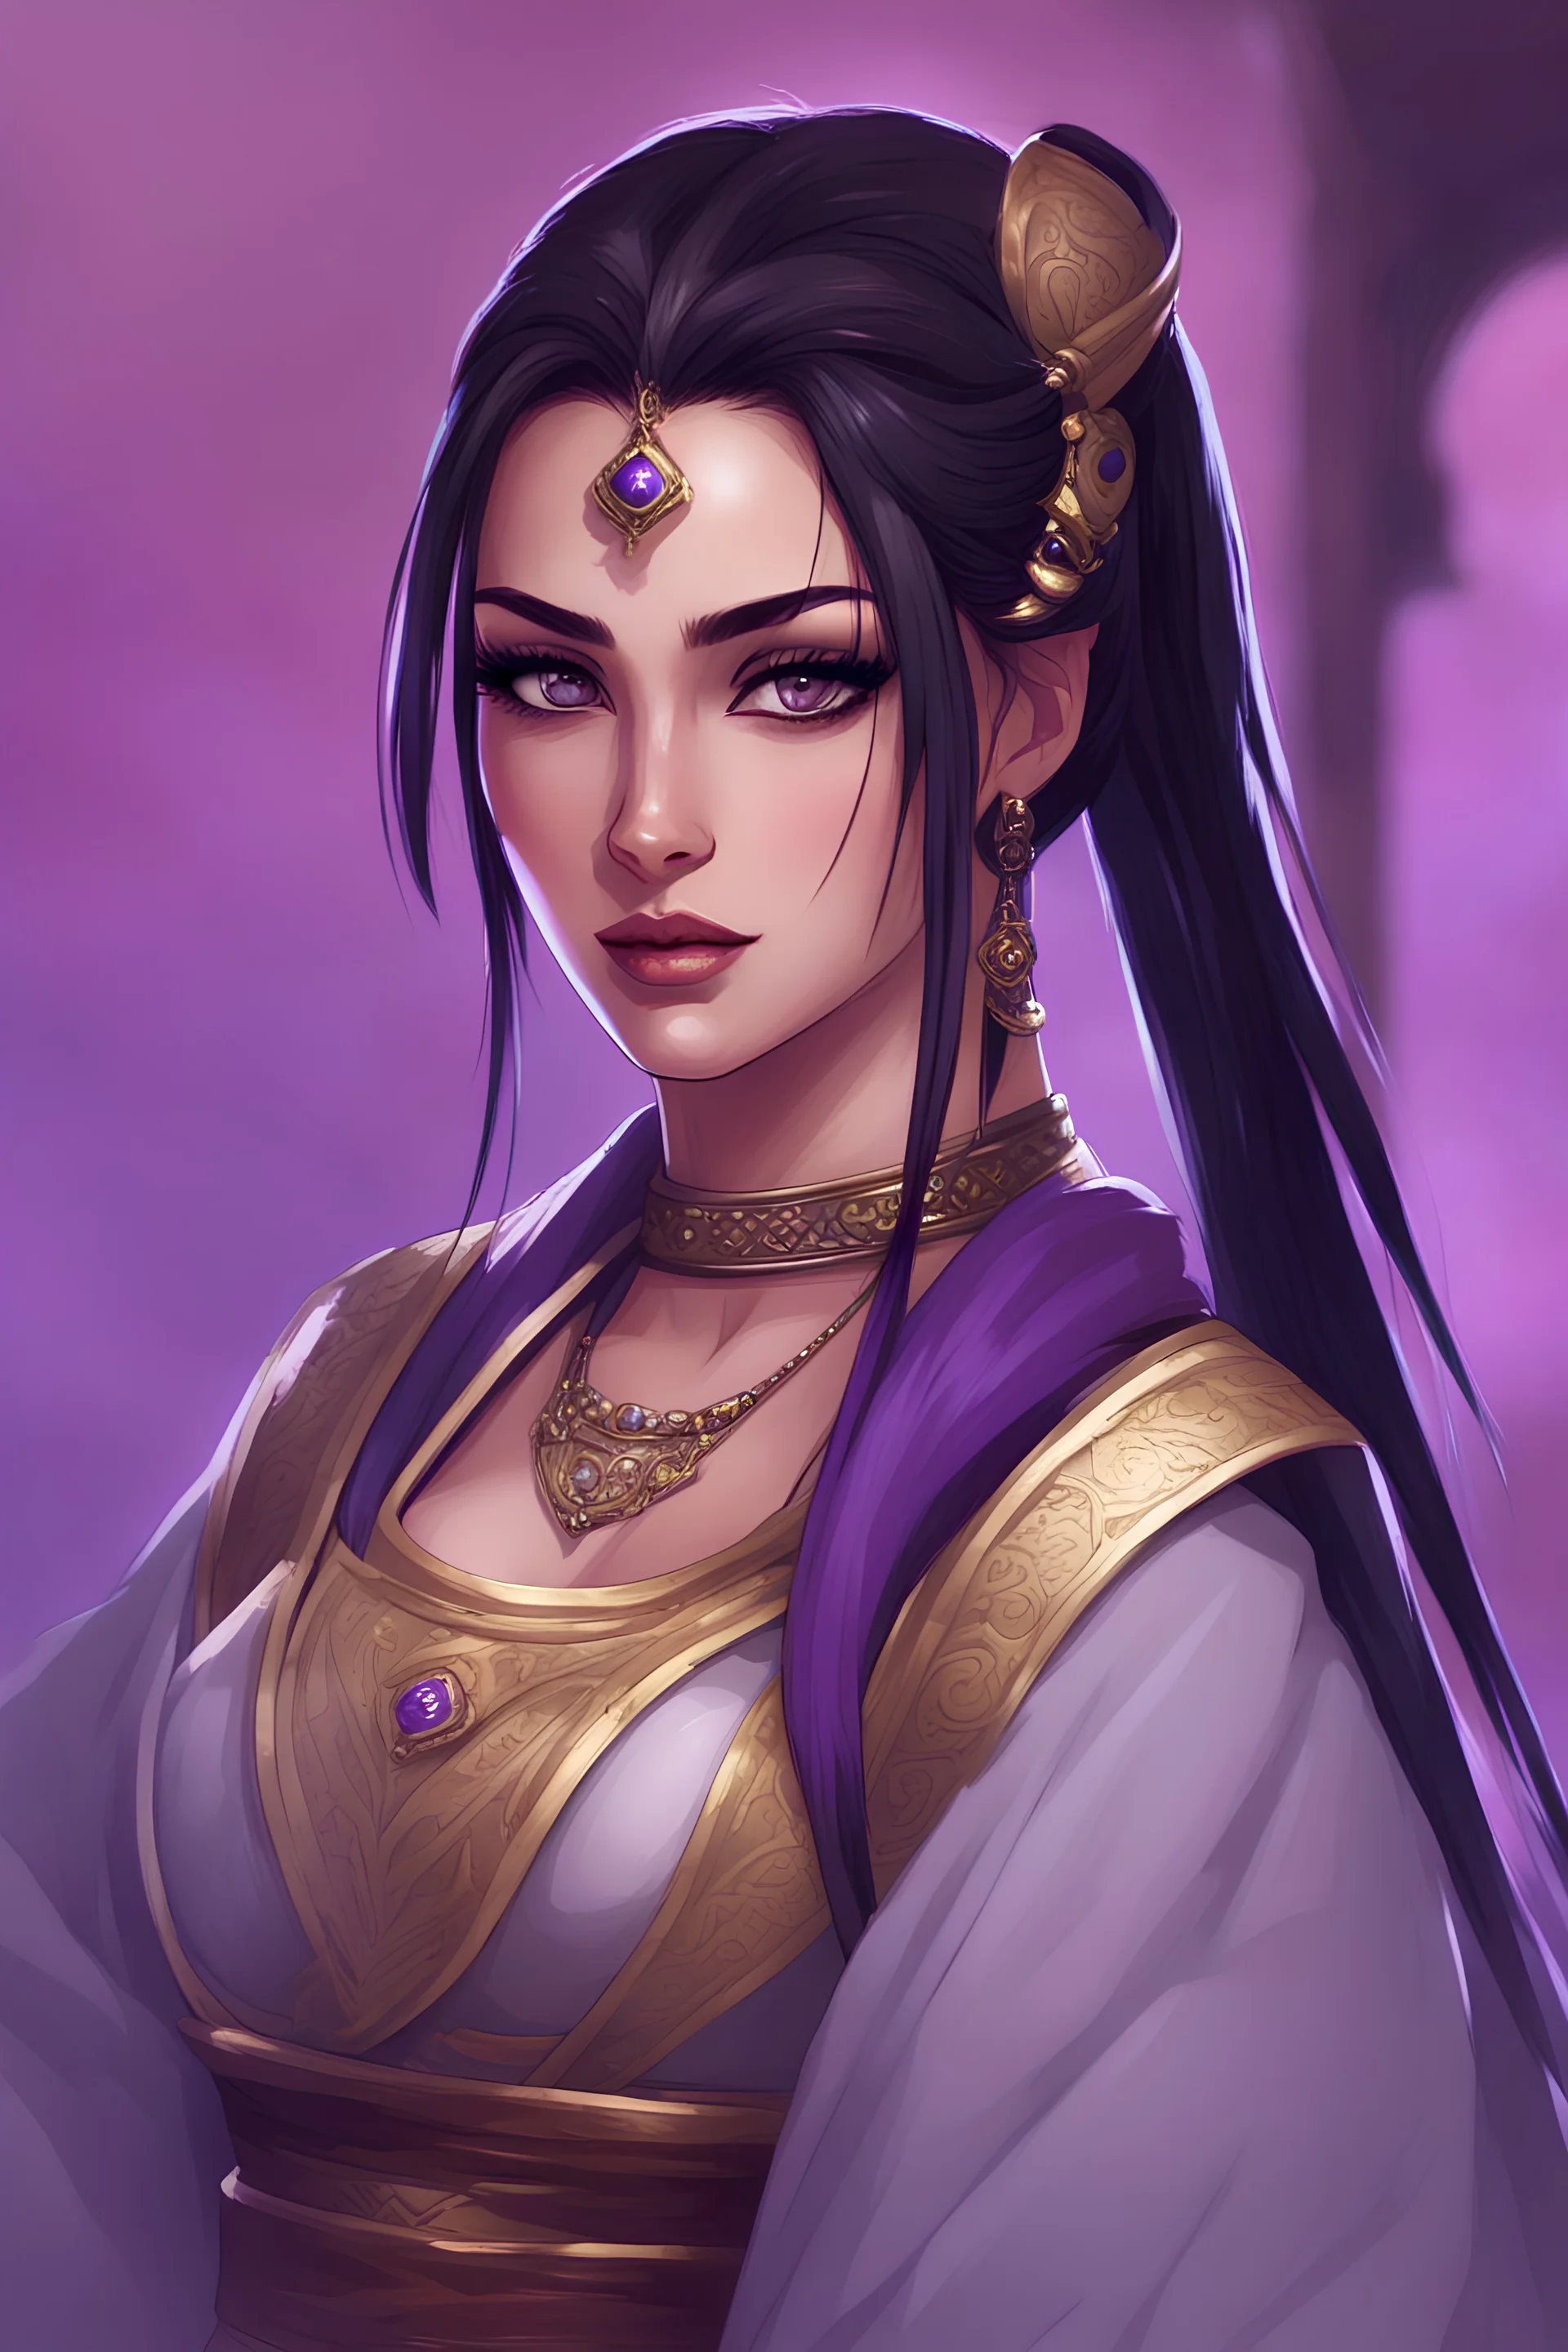 A female arabian warrior princess, D cup, feudal japan, RPG character, travelling merchant, exotic, black hair in ponytail, perfect eyes, purple eyes, dark eyeshadows, long eyelashes, perfect face, perfect smile,curvaceous, hourglass body, stunning beautiful artwork, 8k, alluring, makeup, lipstick, detailed purple eyes, beautiful face, full body,perfect hands, anime by hiro mashima style, 8k, POV looking at viewer, elephants and desert in background